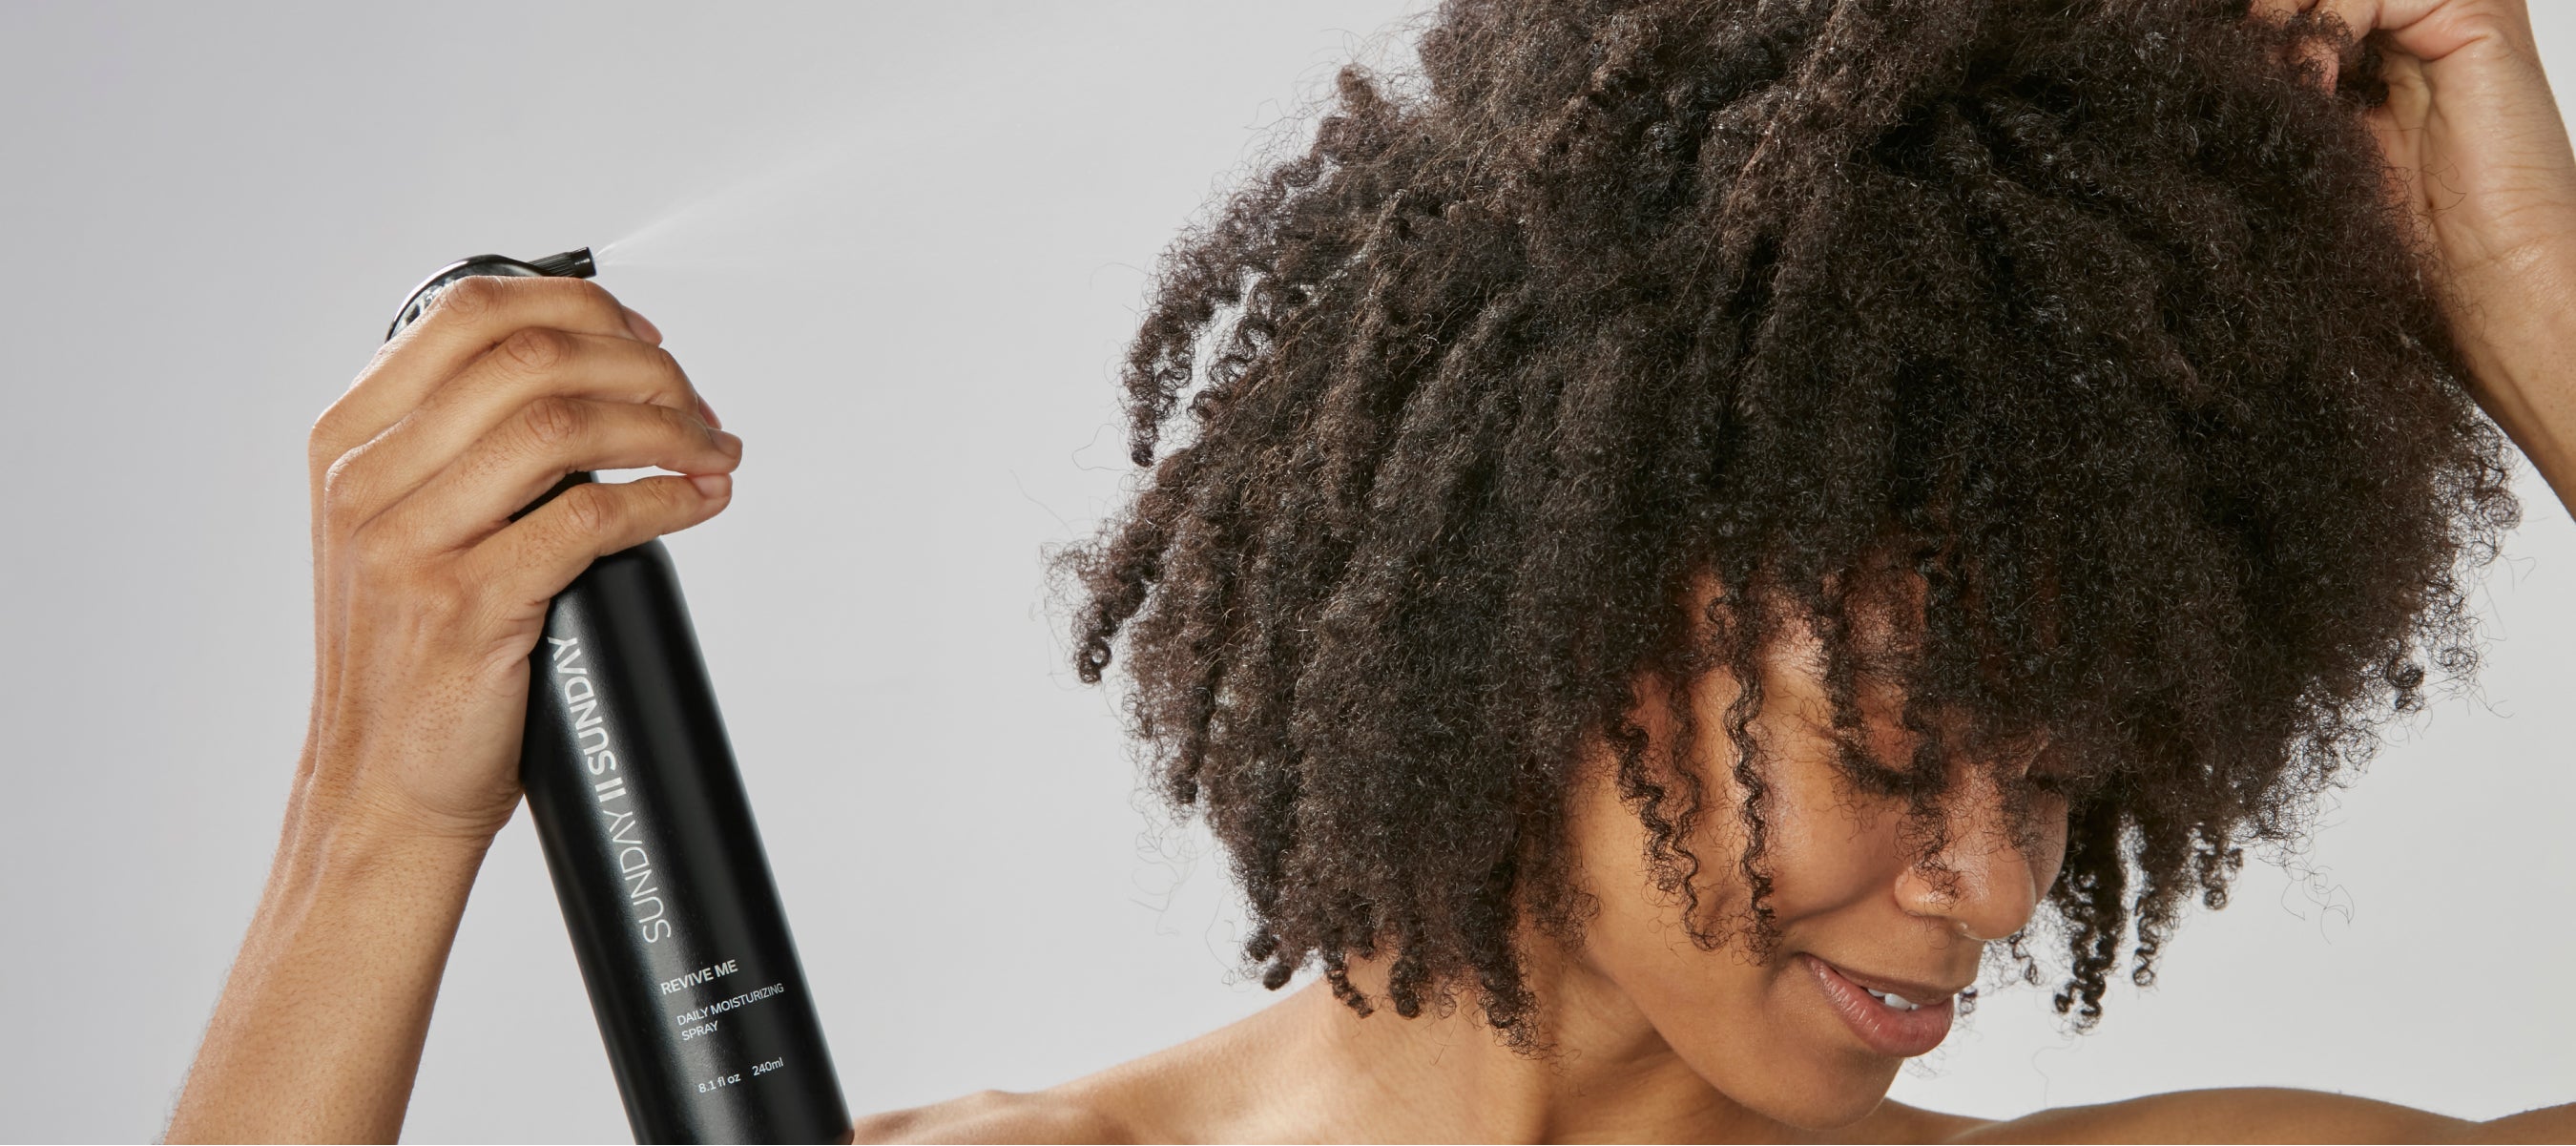 Healthy hair starts with the scalp